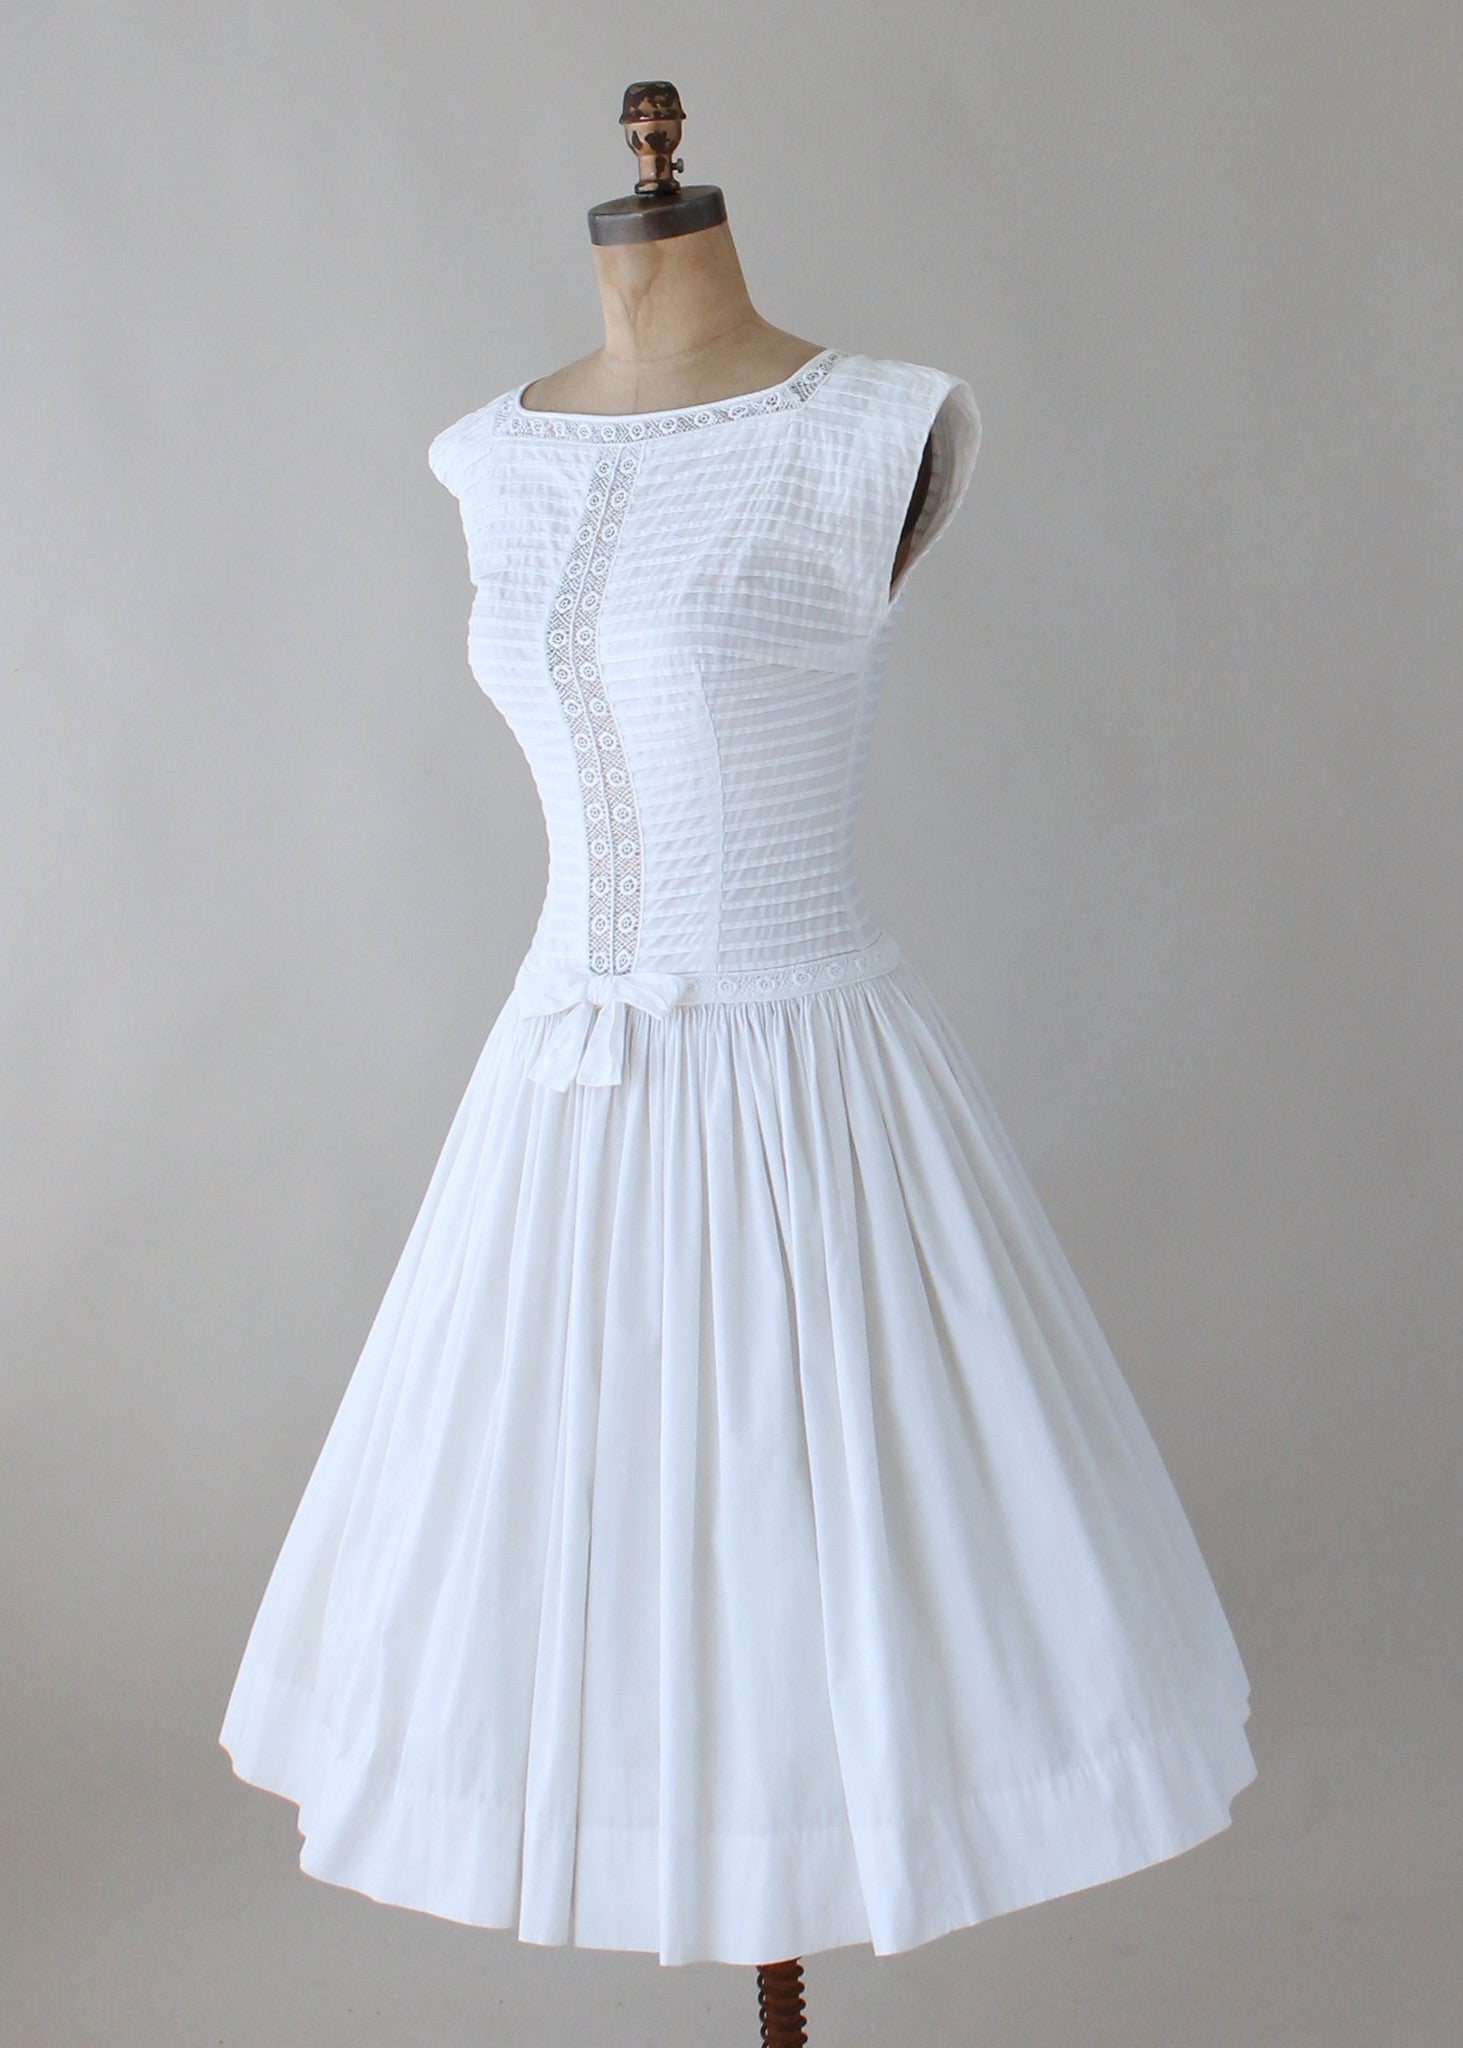 Vintage 1950s White Cotton and Lace Day Dress - Raleigh Vintage